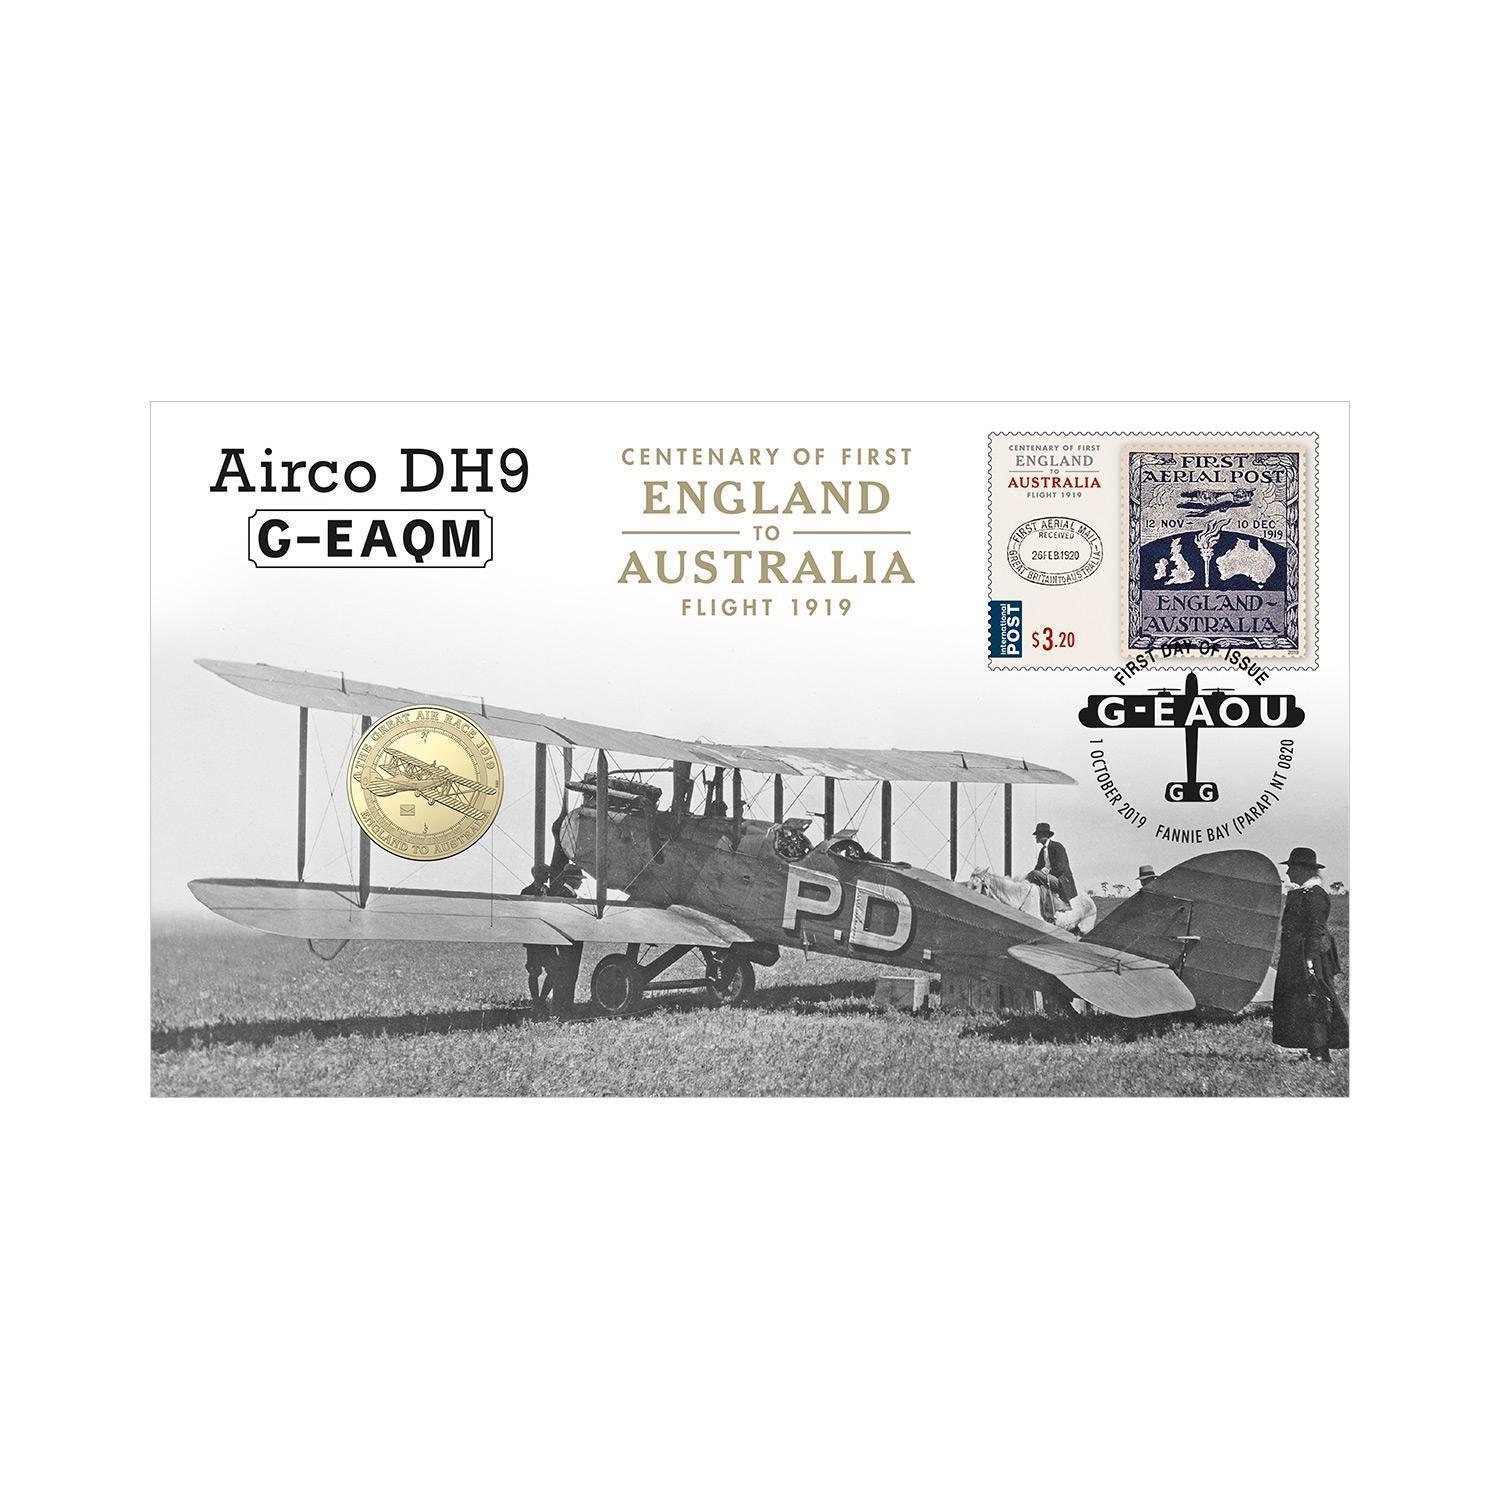 2019 $1 England t2019 $1 England to Australia First Flight Centenary DH9 G-EAQM Stamp & Coin Cover PNCo Australia First Flight Centenary Vikers Vimy G-EAOU Stamp & Coin Cover PNC